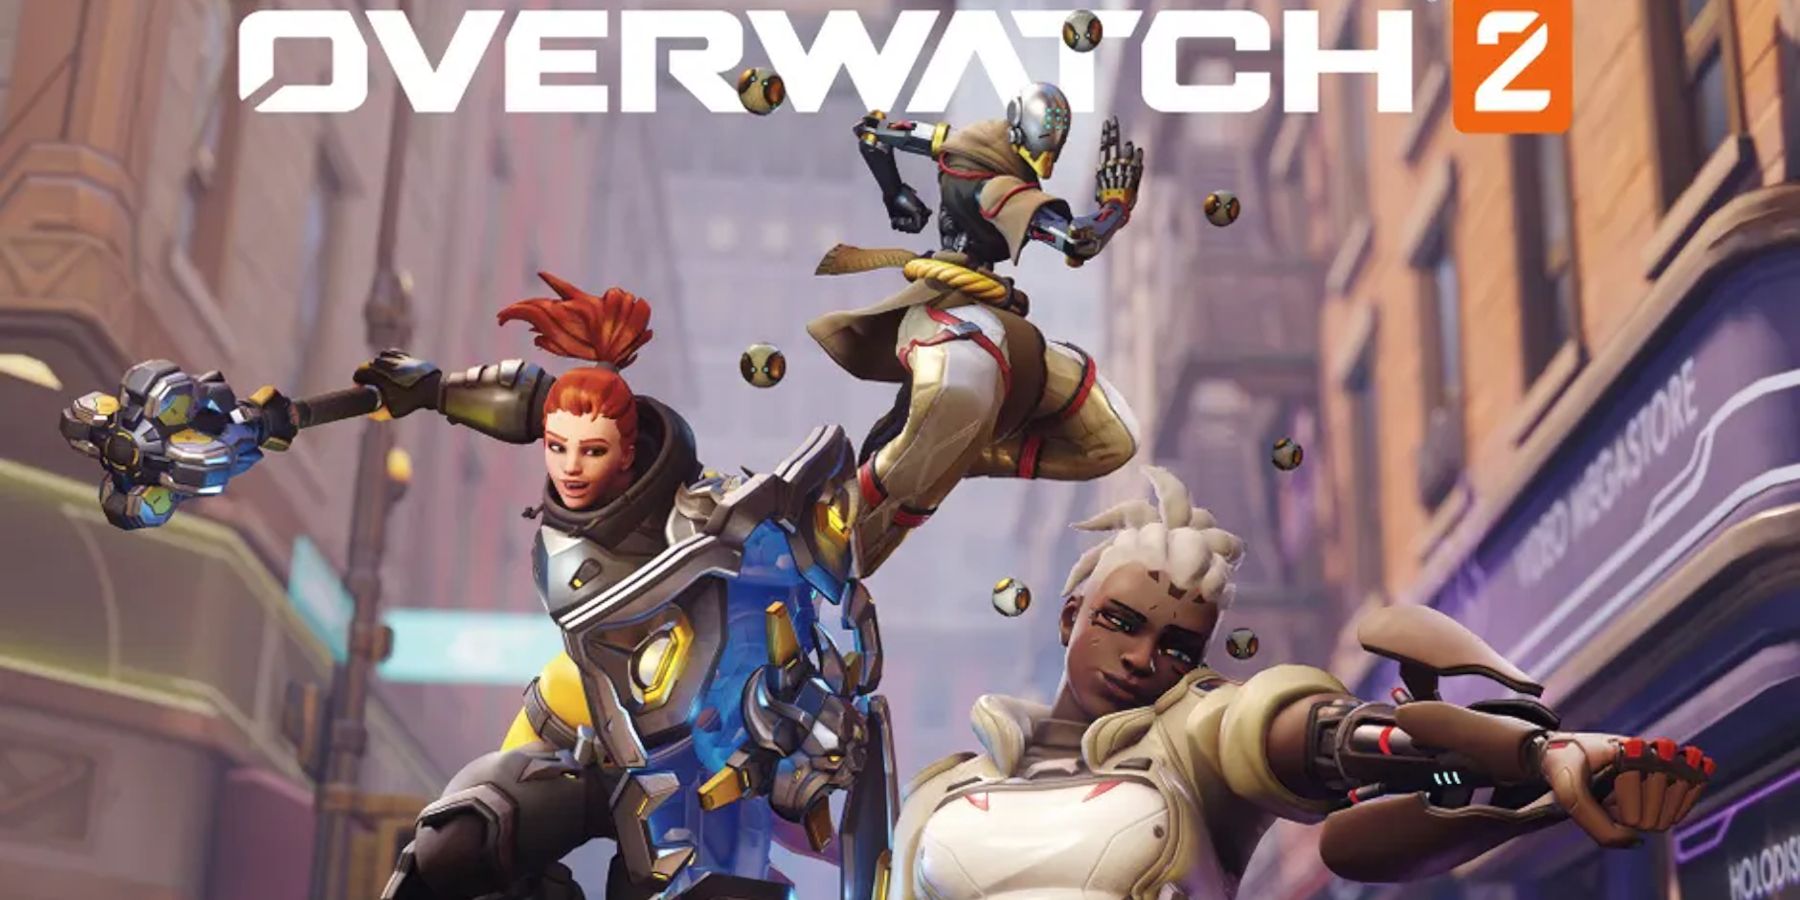 Twitch Streamer Xqc Accidentally Opens Overwatch 2 Live On Stream